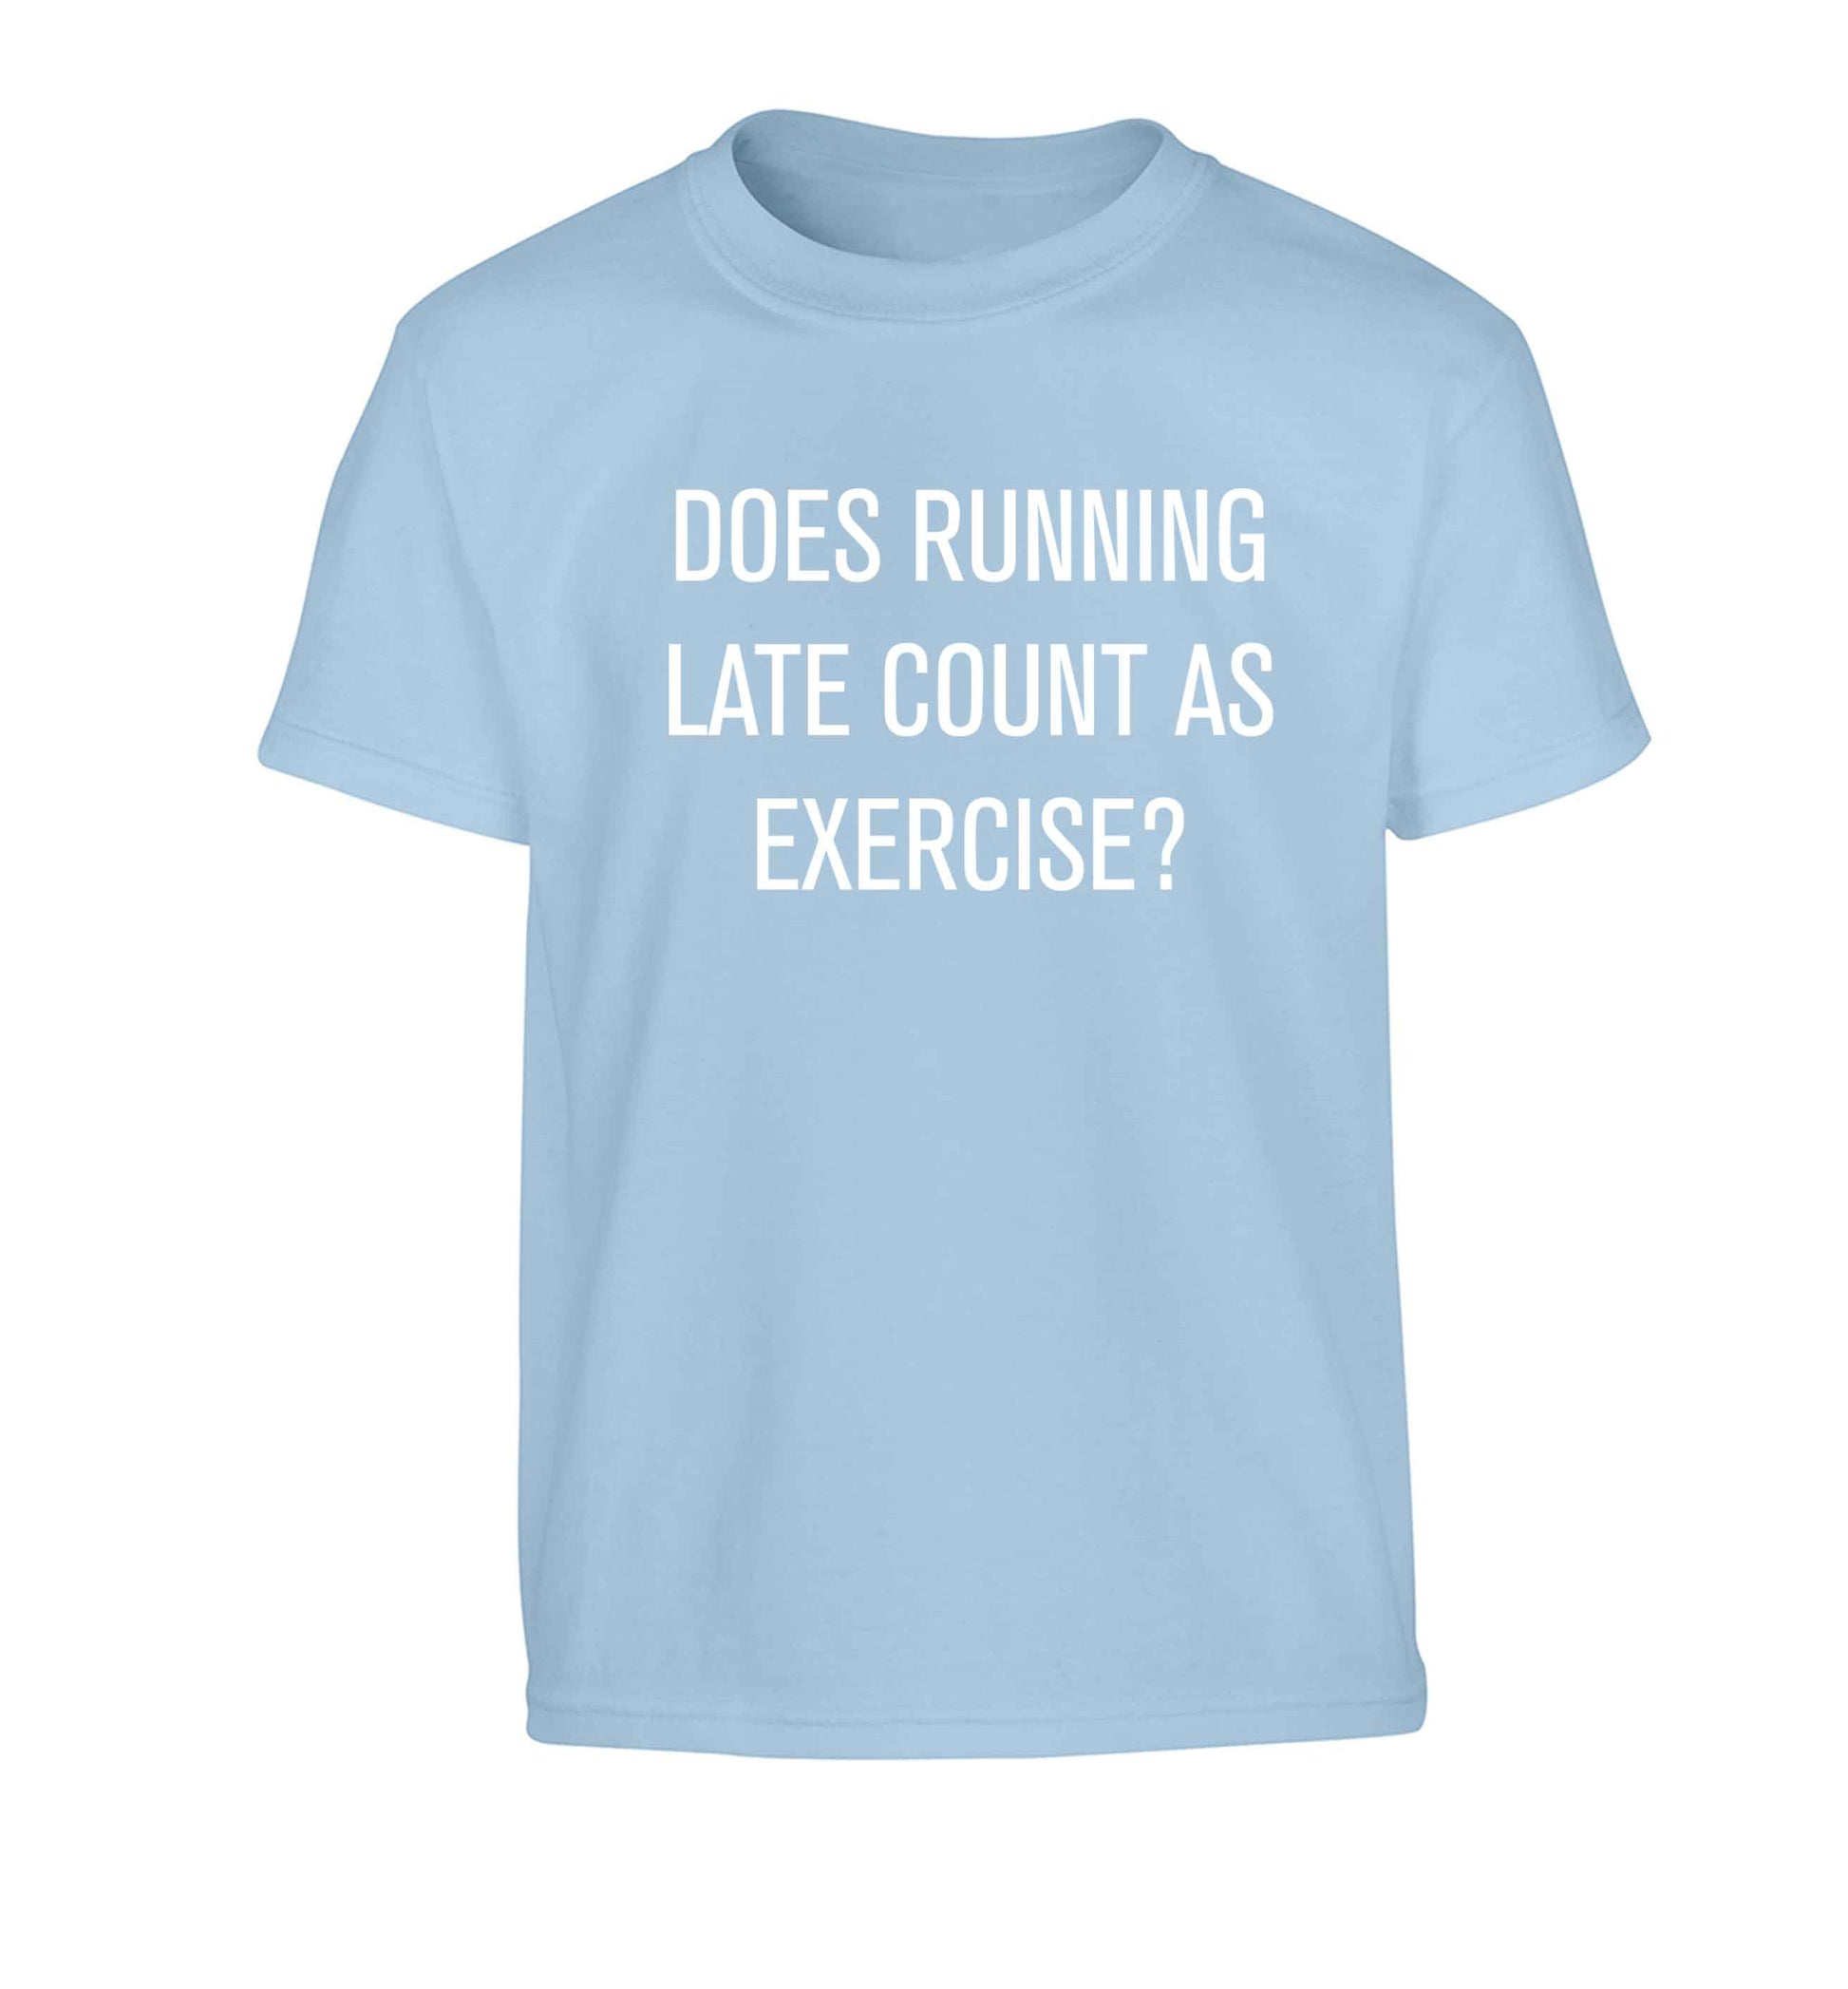 Does running late count as exercise? Children's light blue Tshirt 12-13 Years